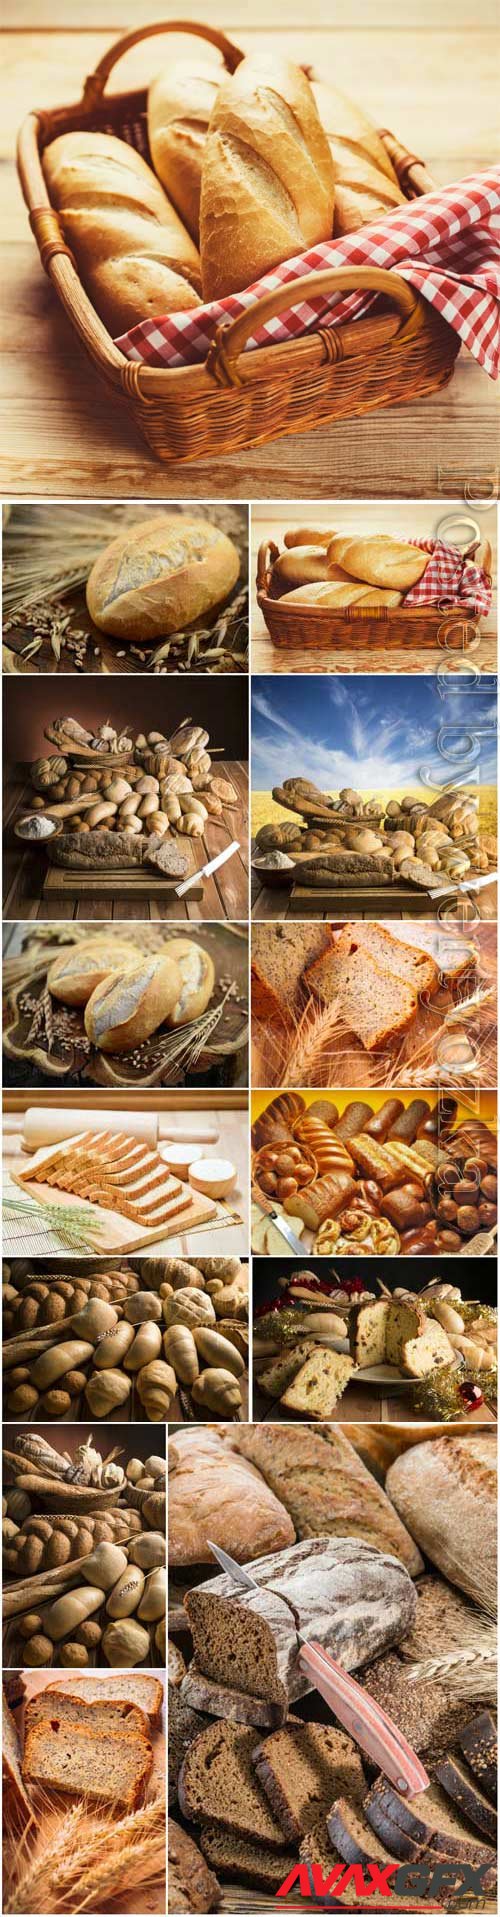 Baskets with fresh bread stock photo